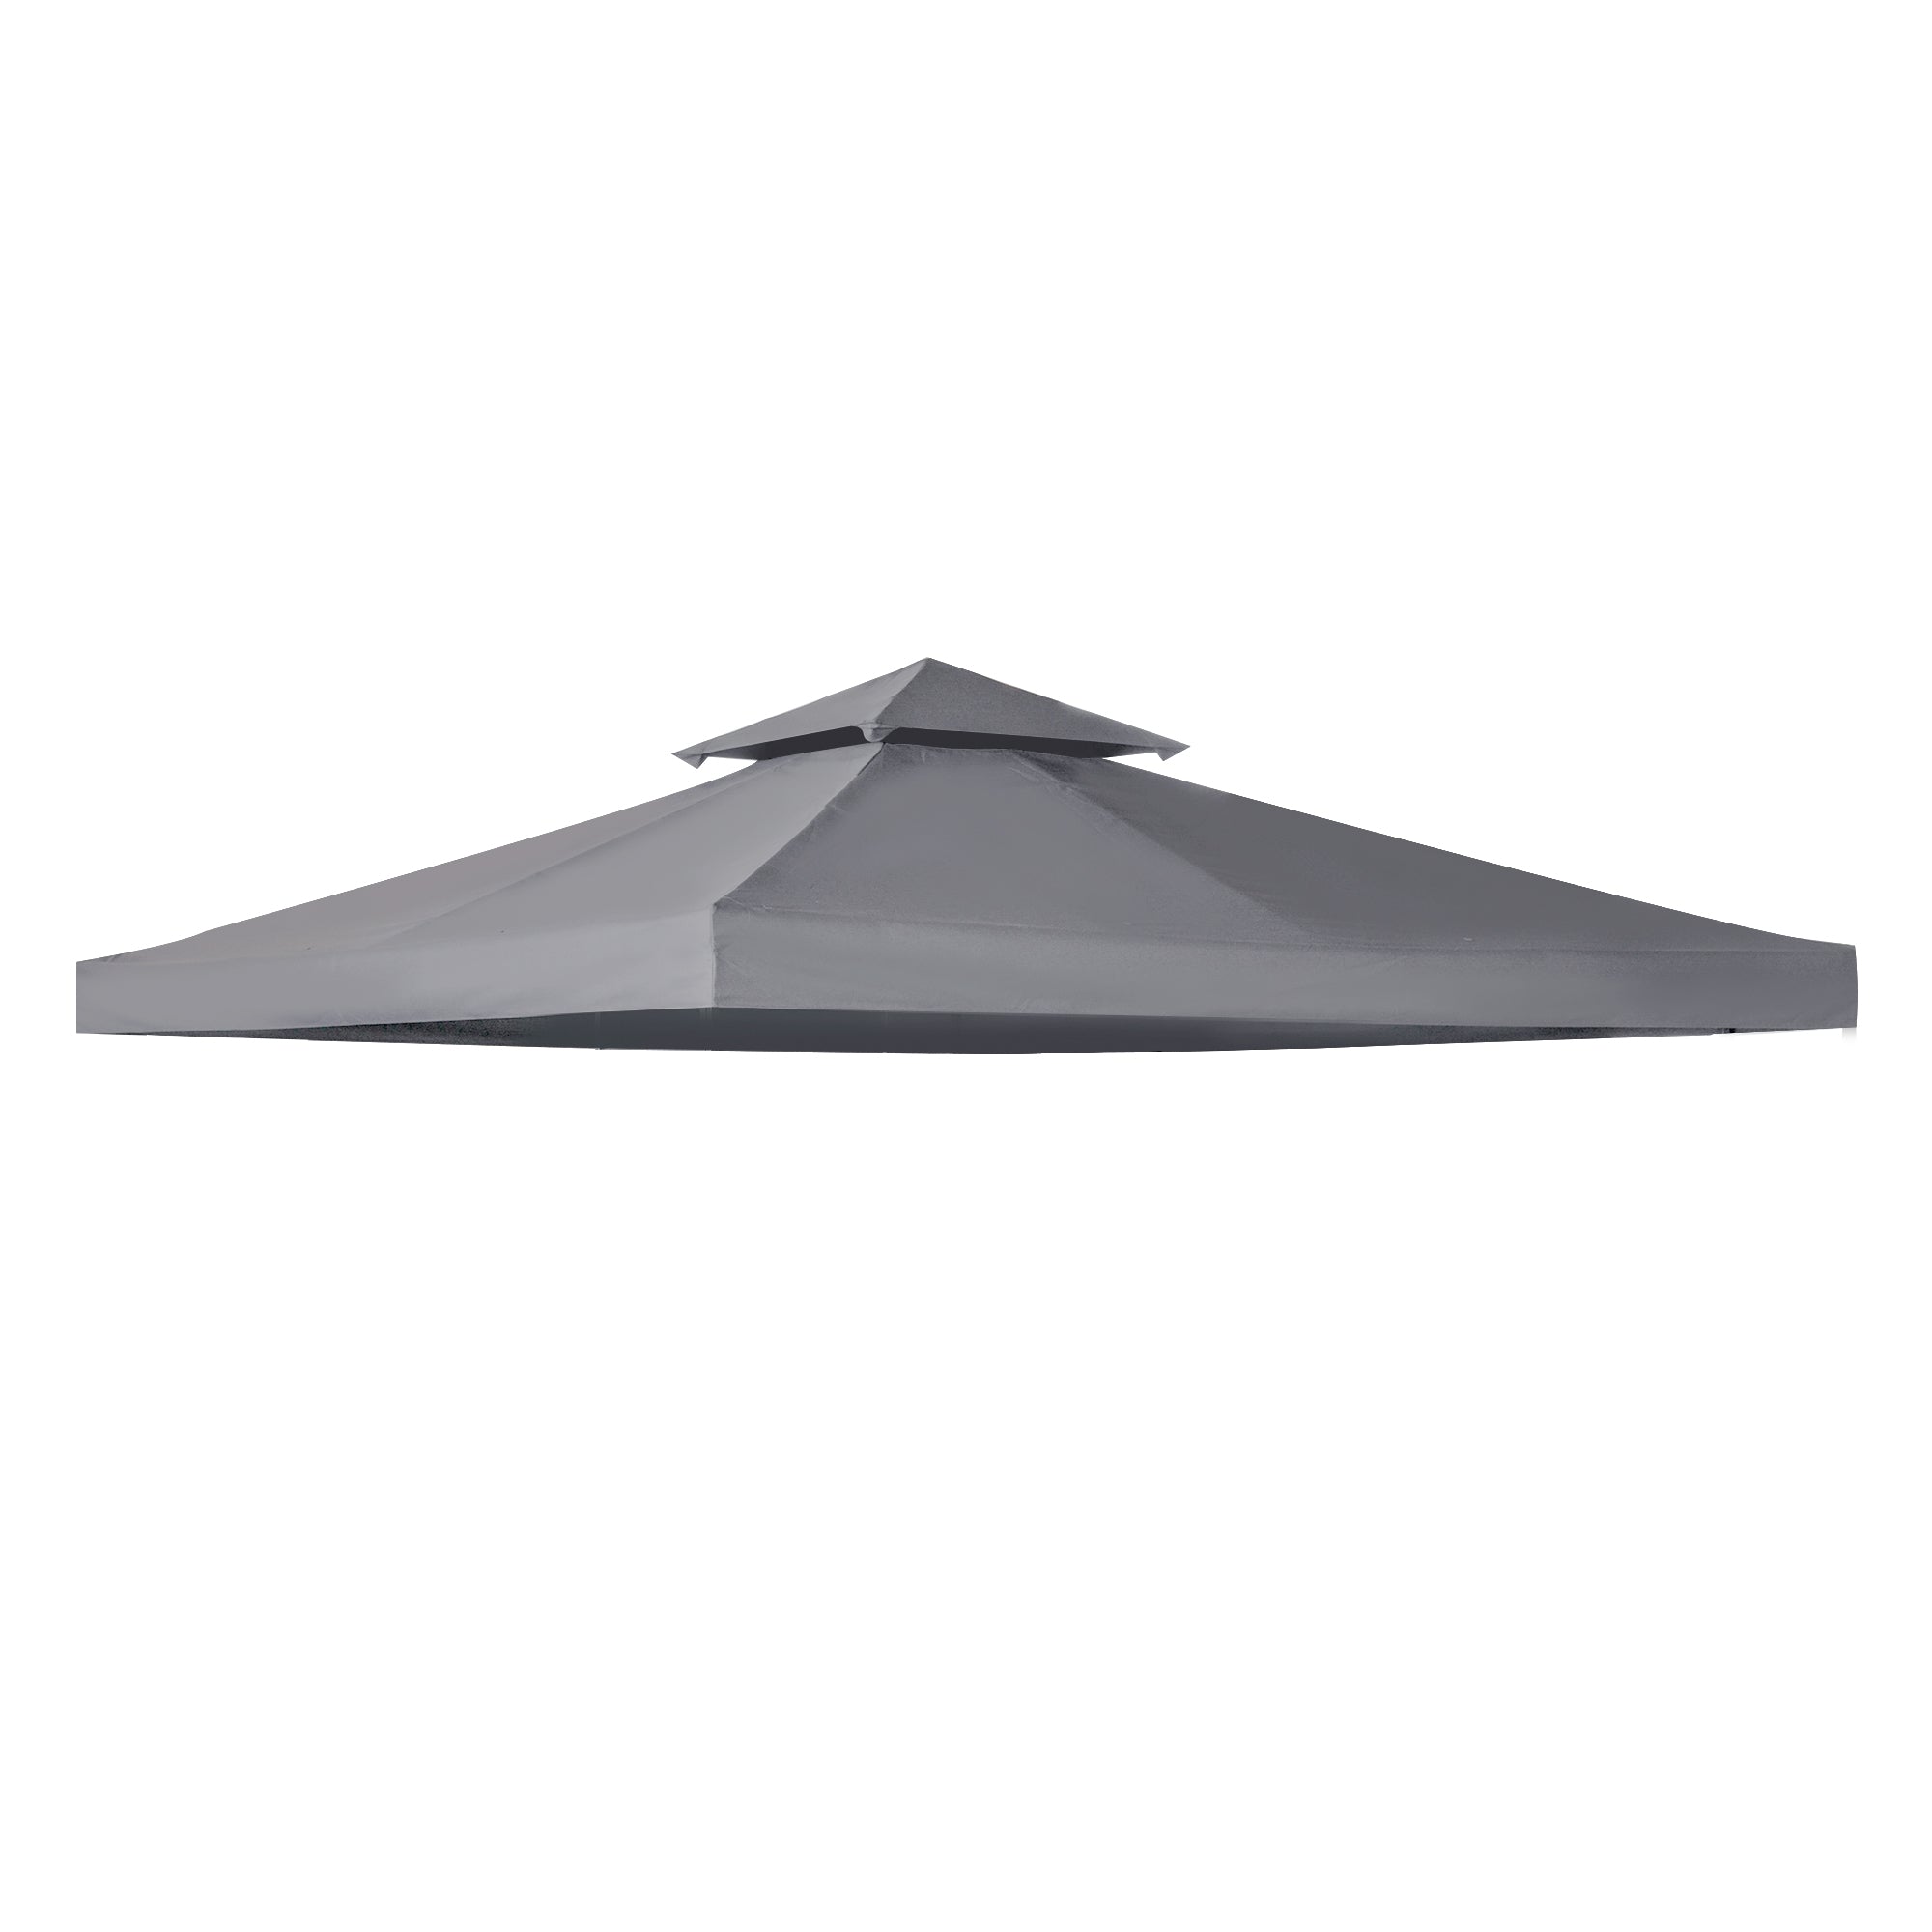 Outsunny 3(m) 2 Tier Garden Gazebo Top Cover Replacement Canopy Roof Deep Grey  | TJ Hughes